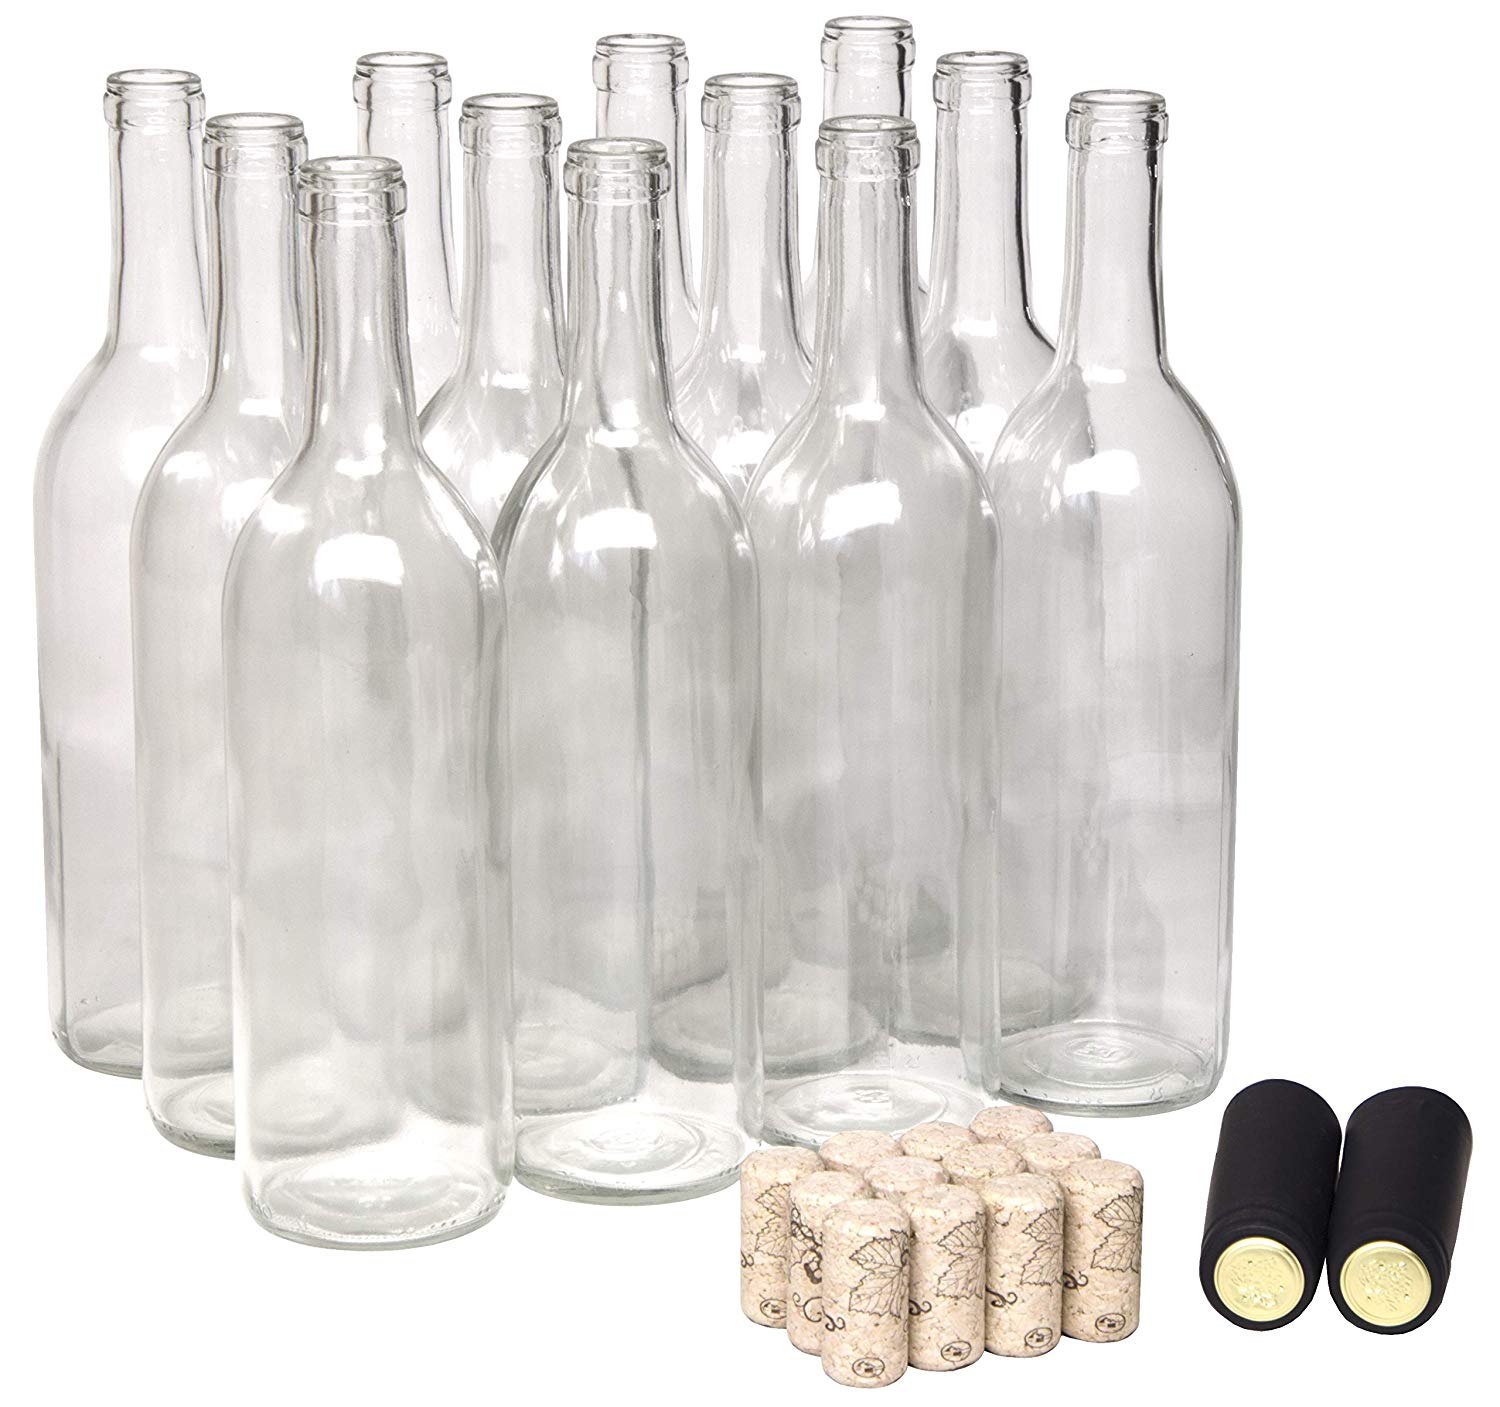 North Mountain Supply 750ml Glass Bordeaux Wine Bottle Flat-bottomed Cork Finish - with #8 Premium Natural Corks & PVC Shrink Capsules - Case of 12